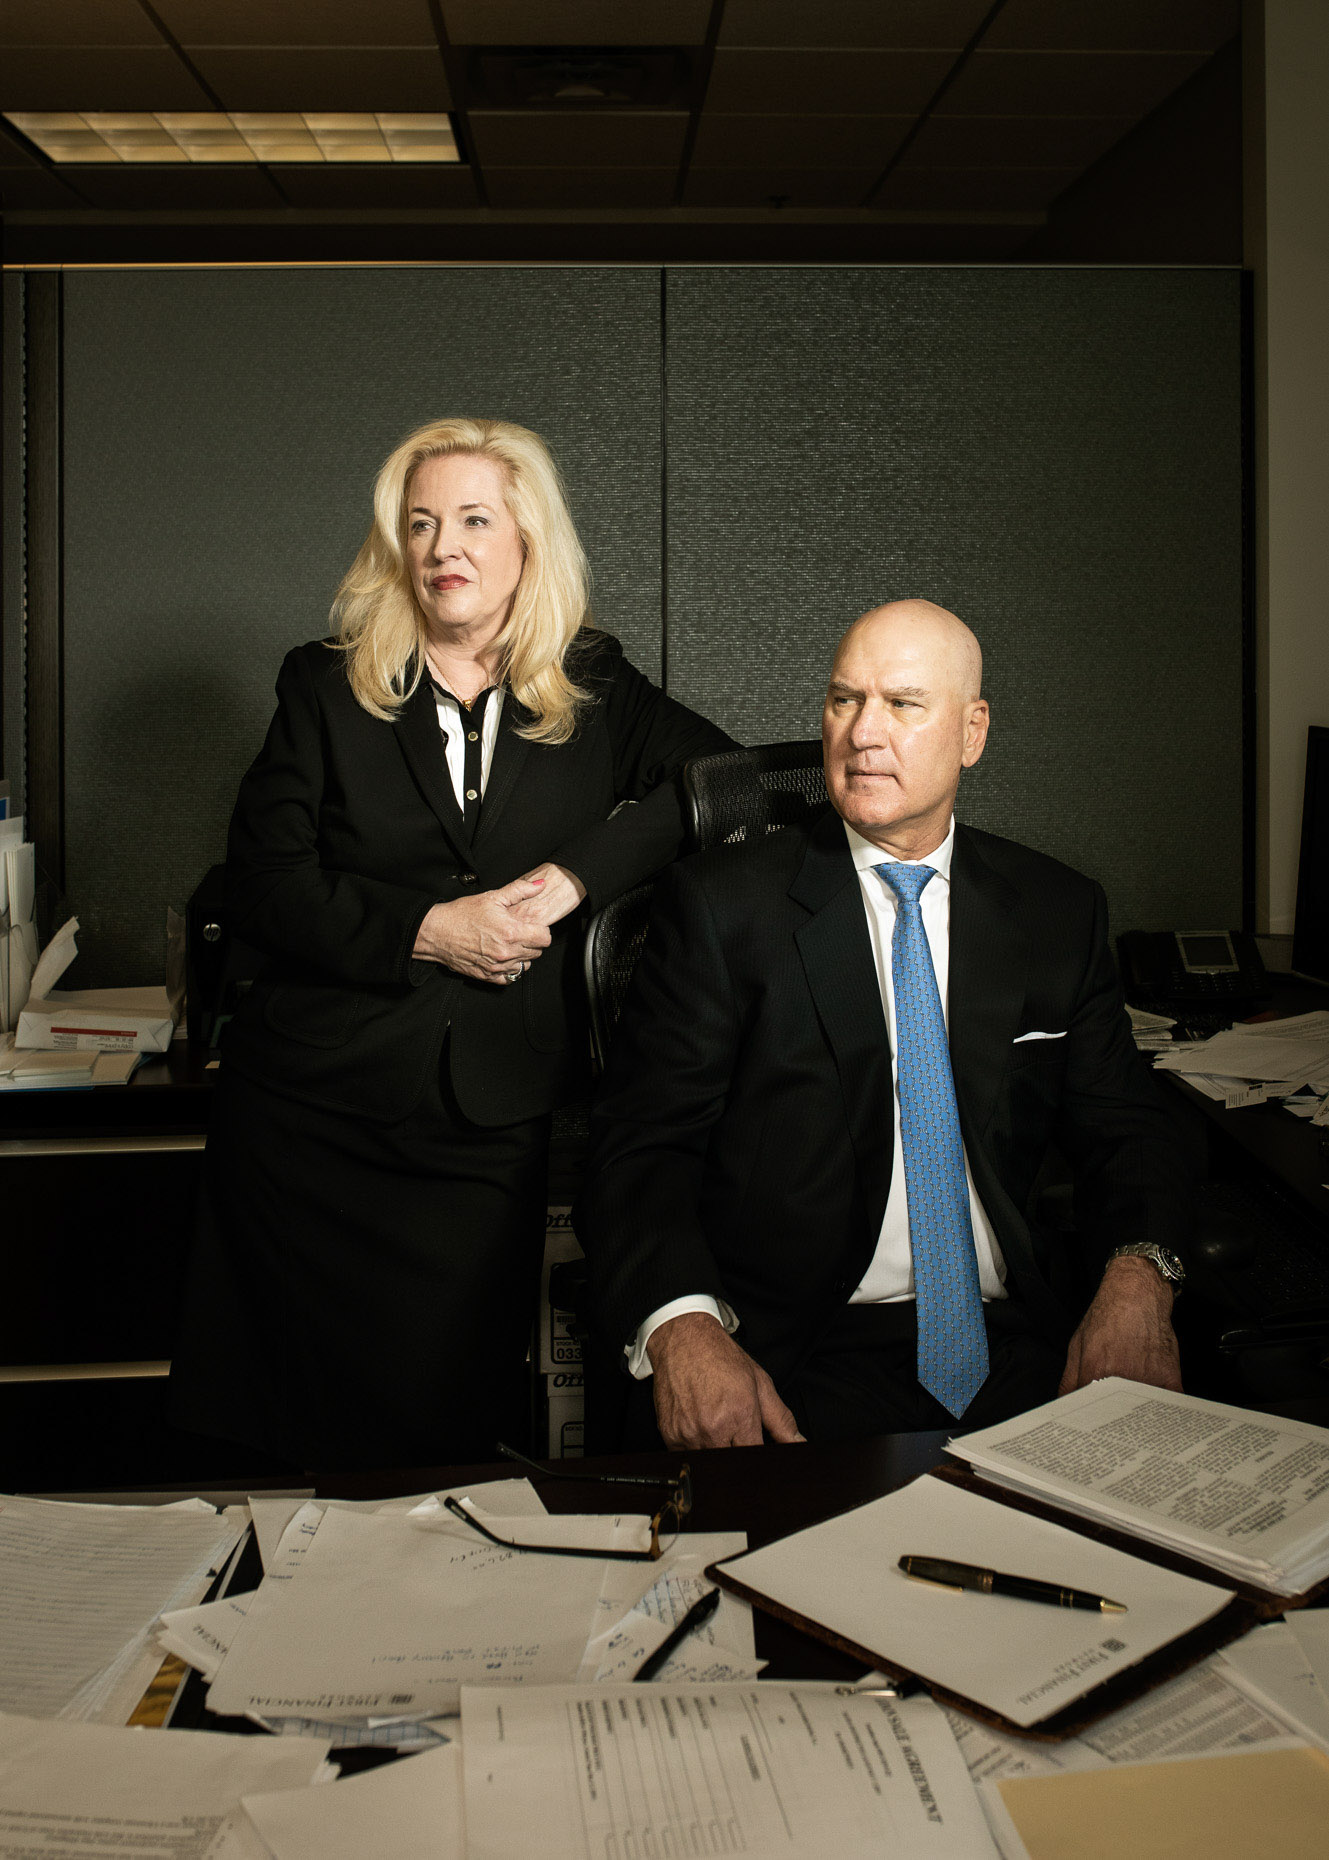 First Financial Network CEO Bliss Morris and her husband and company president John Morris for The Wall Street Journal in Oklahoma City. Brett Deering Photography